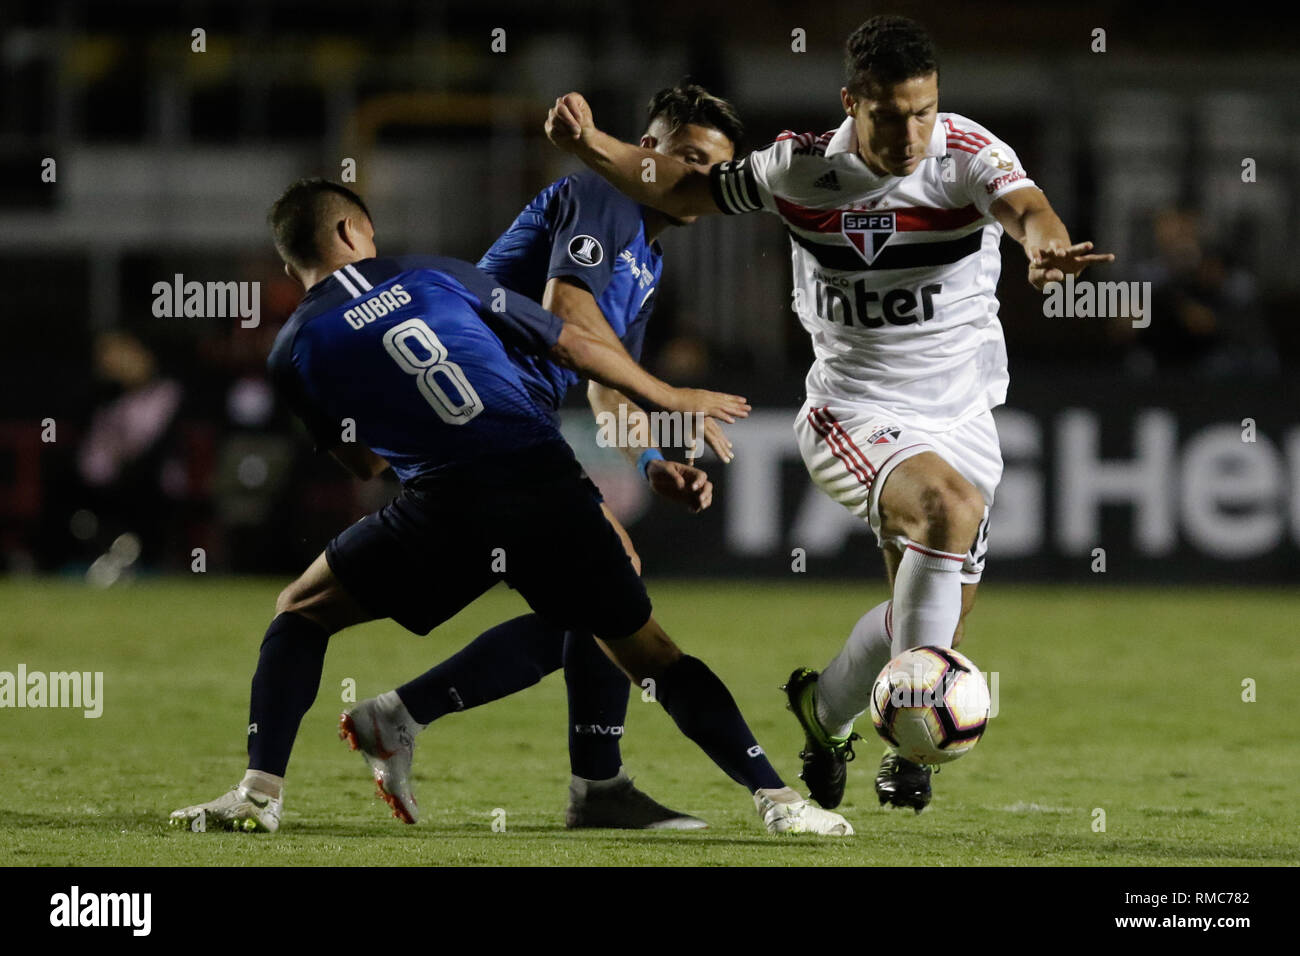 Sao Paolo, Brazil. 13th Feb, 2019. Hernanes during the match between Sao Paulo and Talleres (ARG), a match valid for the Copa Libertadores of America 2019. Credit: Thiago Bernardes/Pacific Press/Alamy Live News Stock Photo